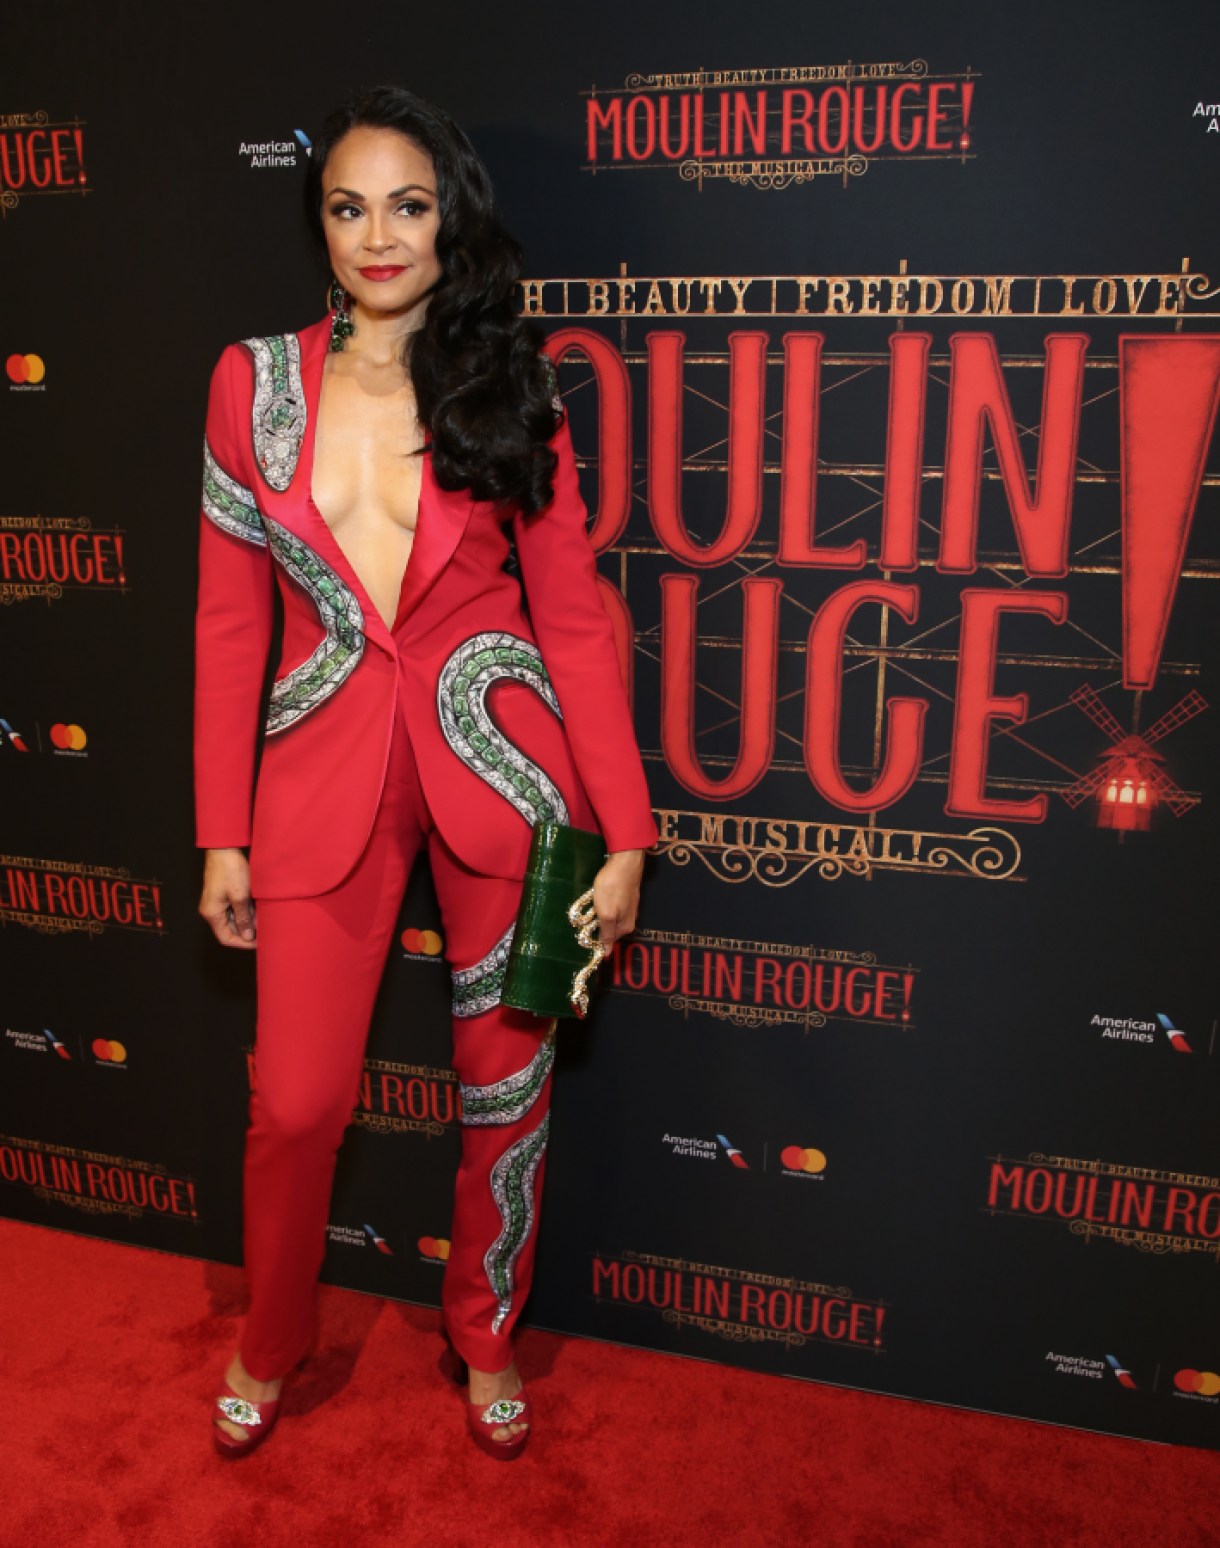 NEW YORK, NY - JULY 25:  Karen Olivo attends the Broadway Opening Night performance After Party for "Moulin Rouge! The Musical" at the Hammerstein Ballroom on July 25, 2019 in New York City.  (Photo by Walter McBride/WireImage)